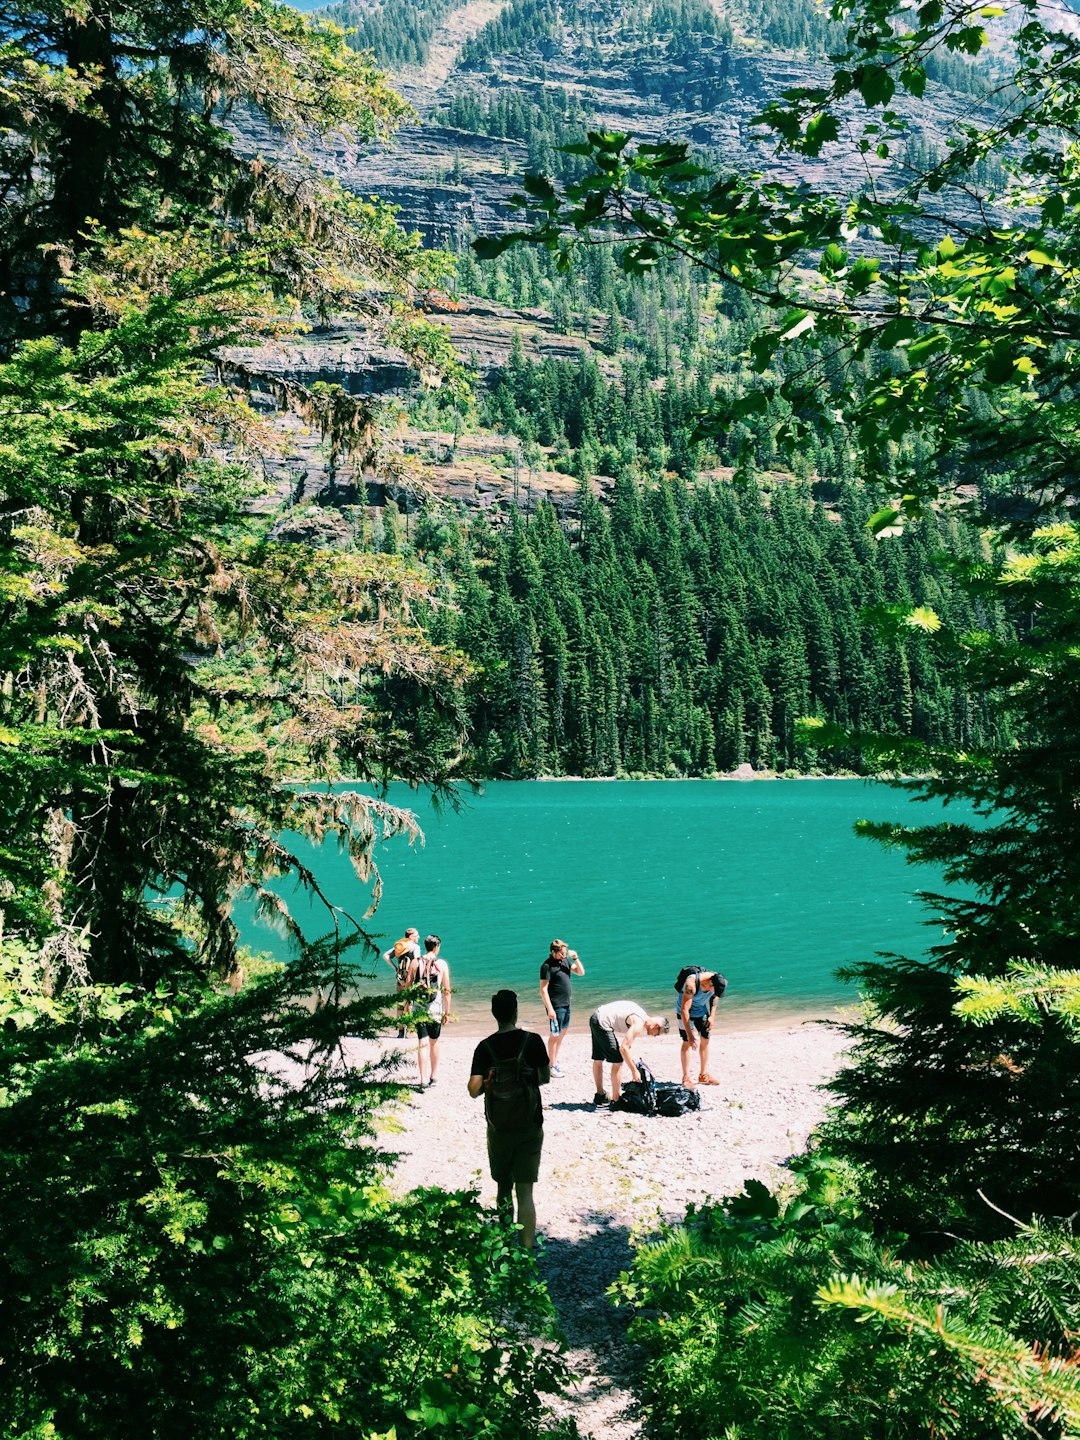 group of people standing beside trees and lake near mountain